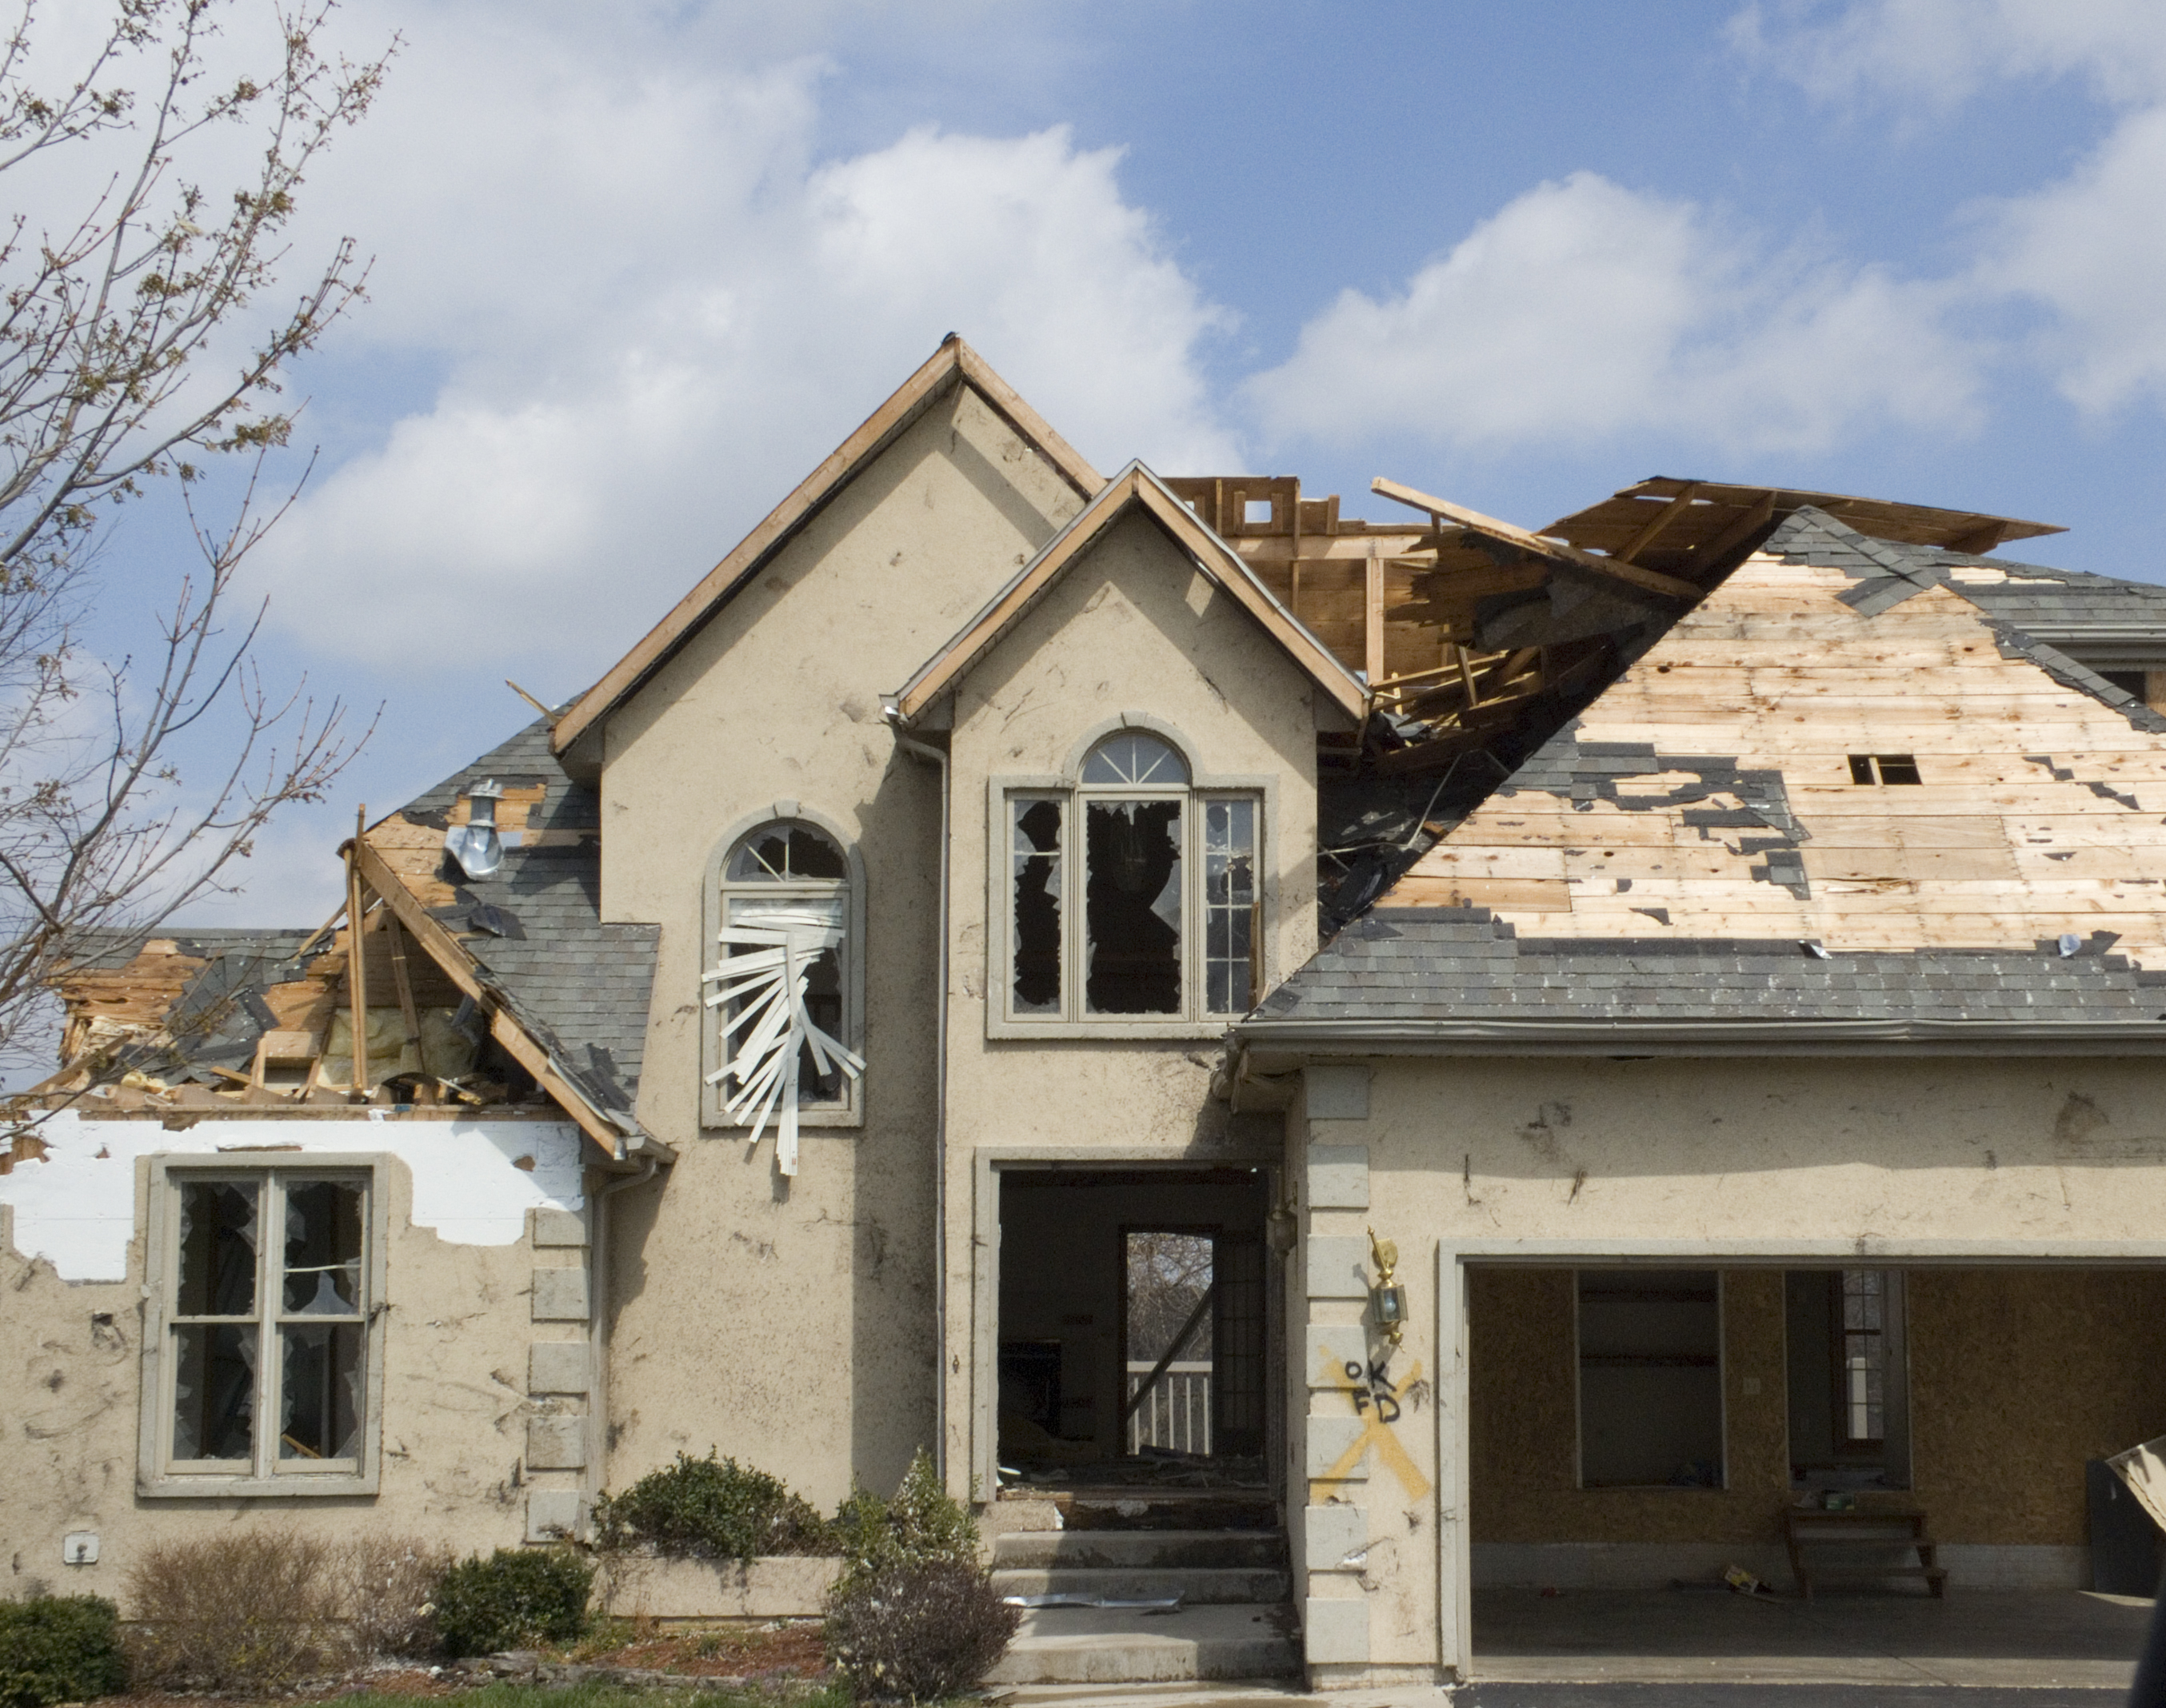 How To Safely Check Your Home For Damage